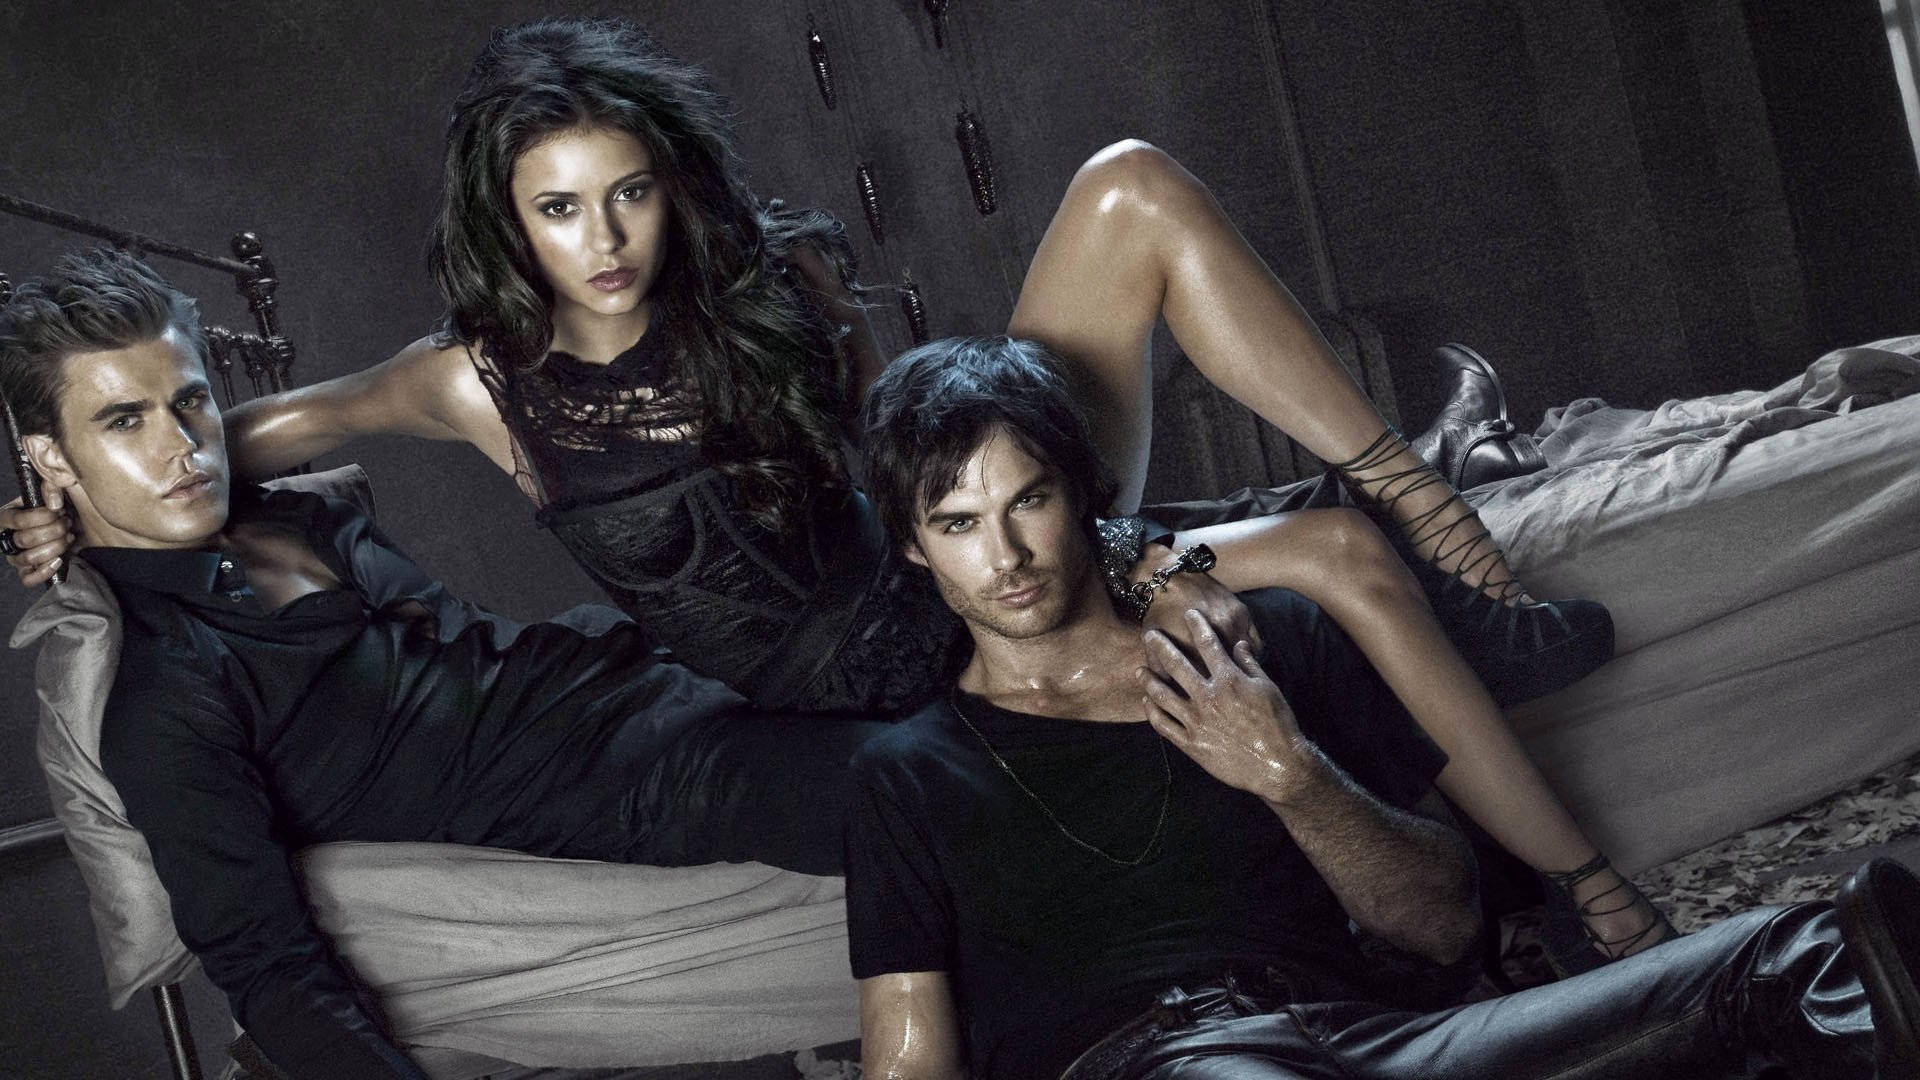 The Vampire Diaries Characters On Bed Wallpaper